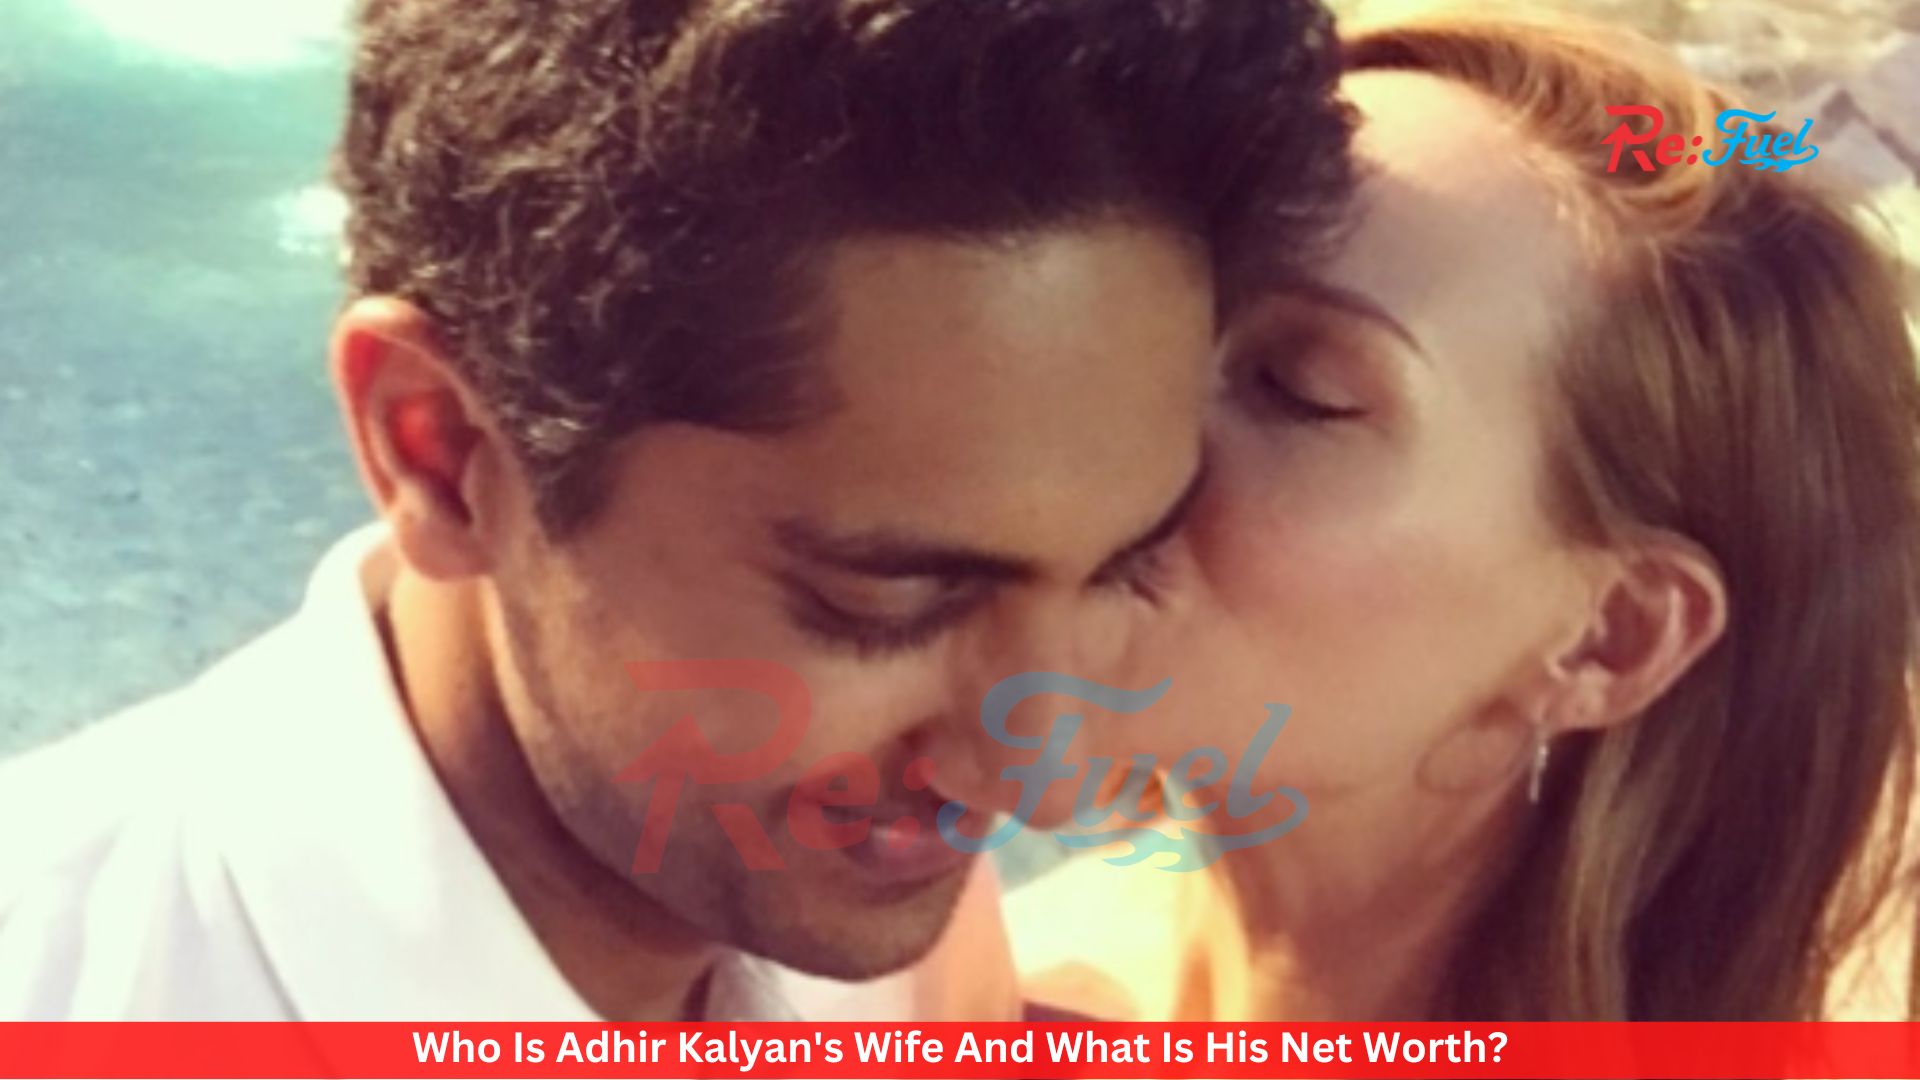 Who Is Adhir Kalyan's Wife And What Is His Net Worth?